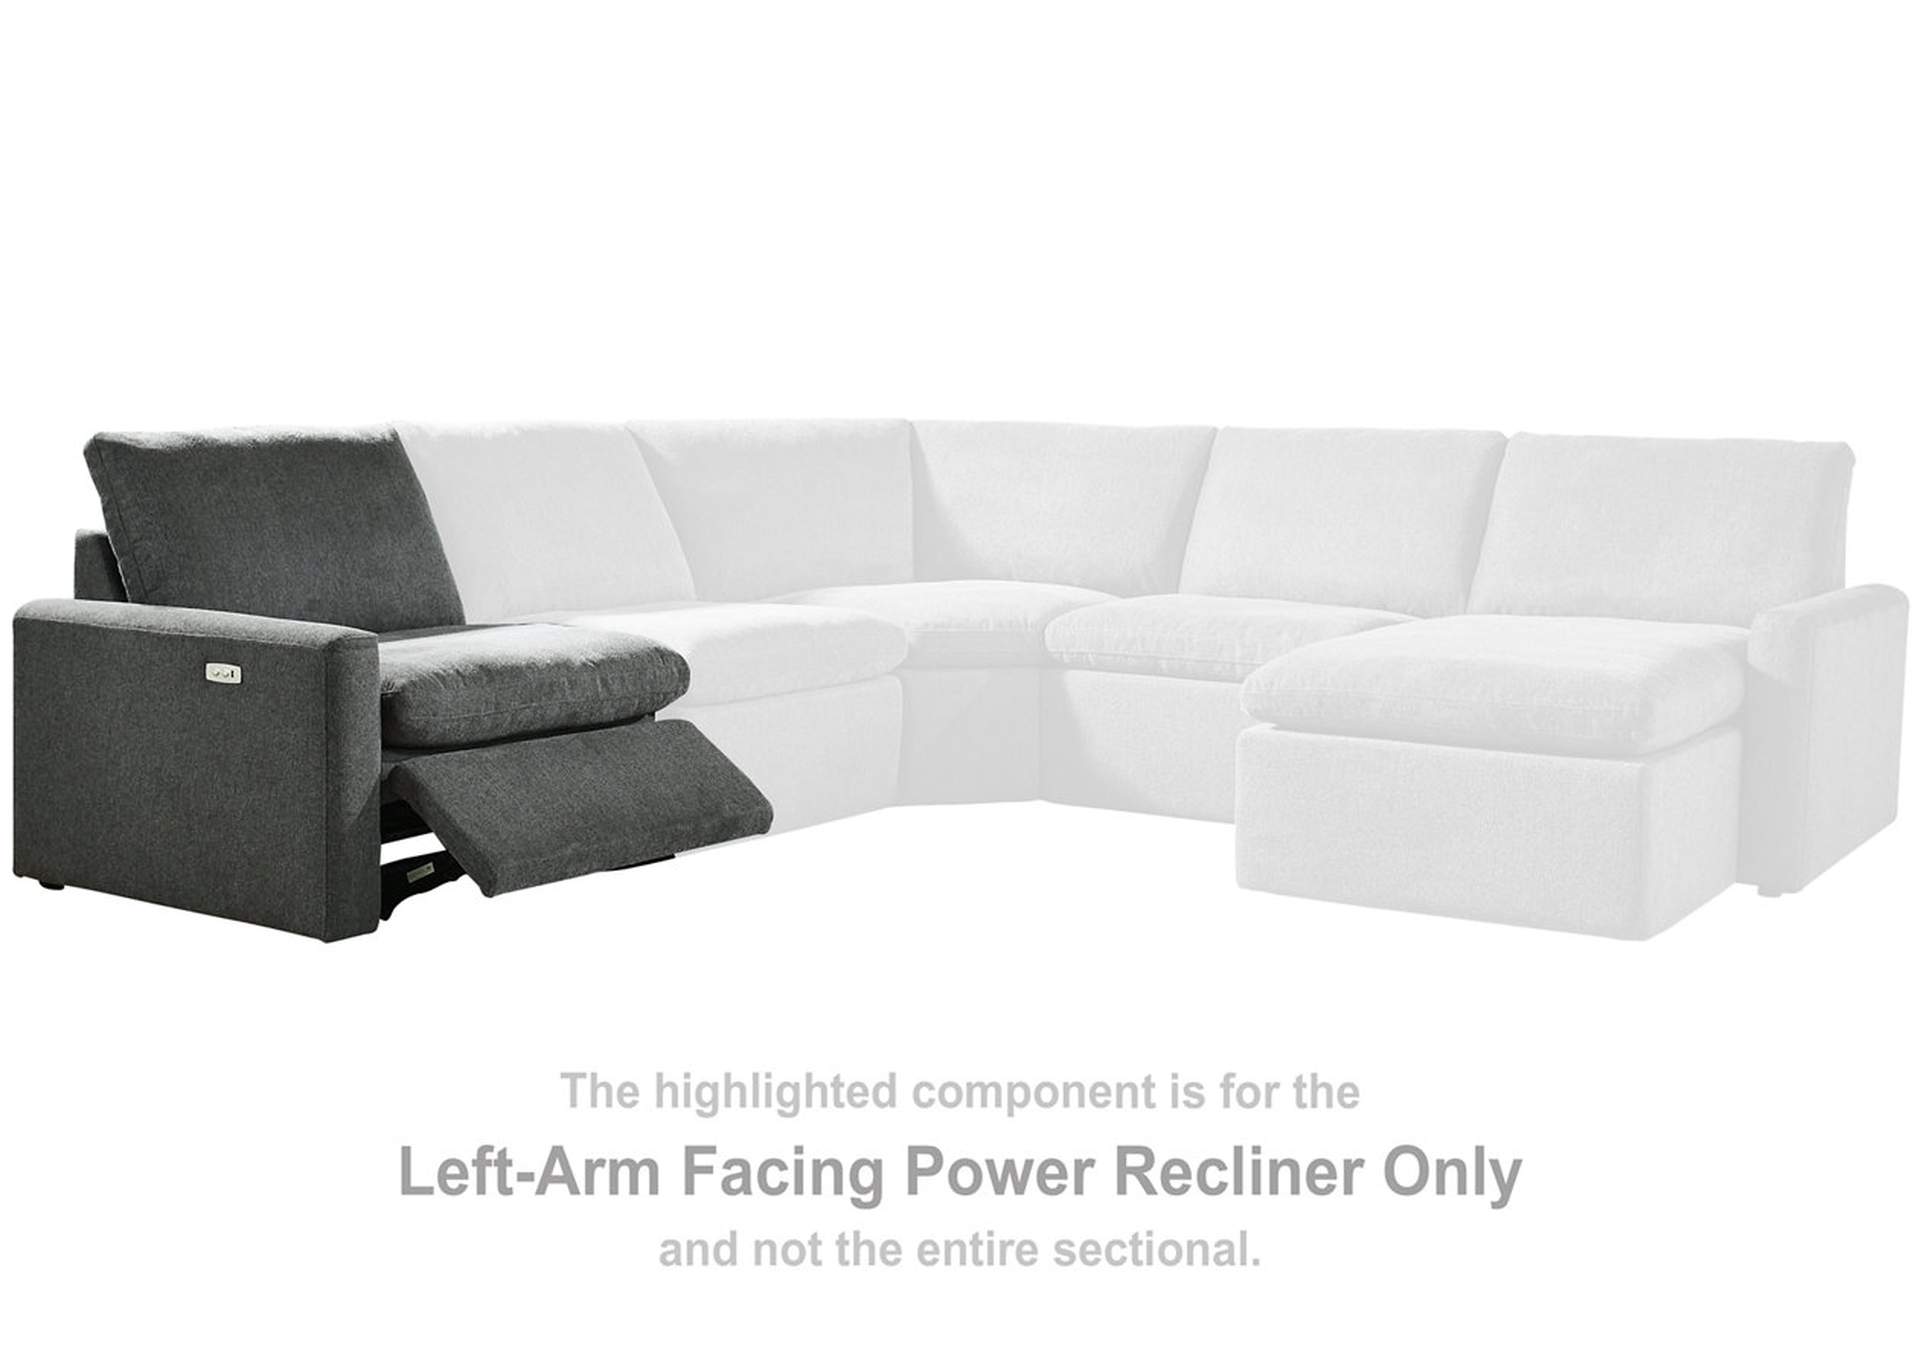 Hartsdale 5-Piece Power Reclining Sectional with Chaise,Signature Design By Ashley